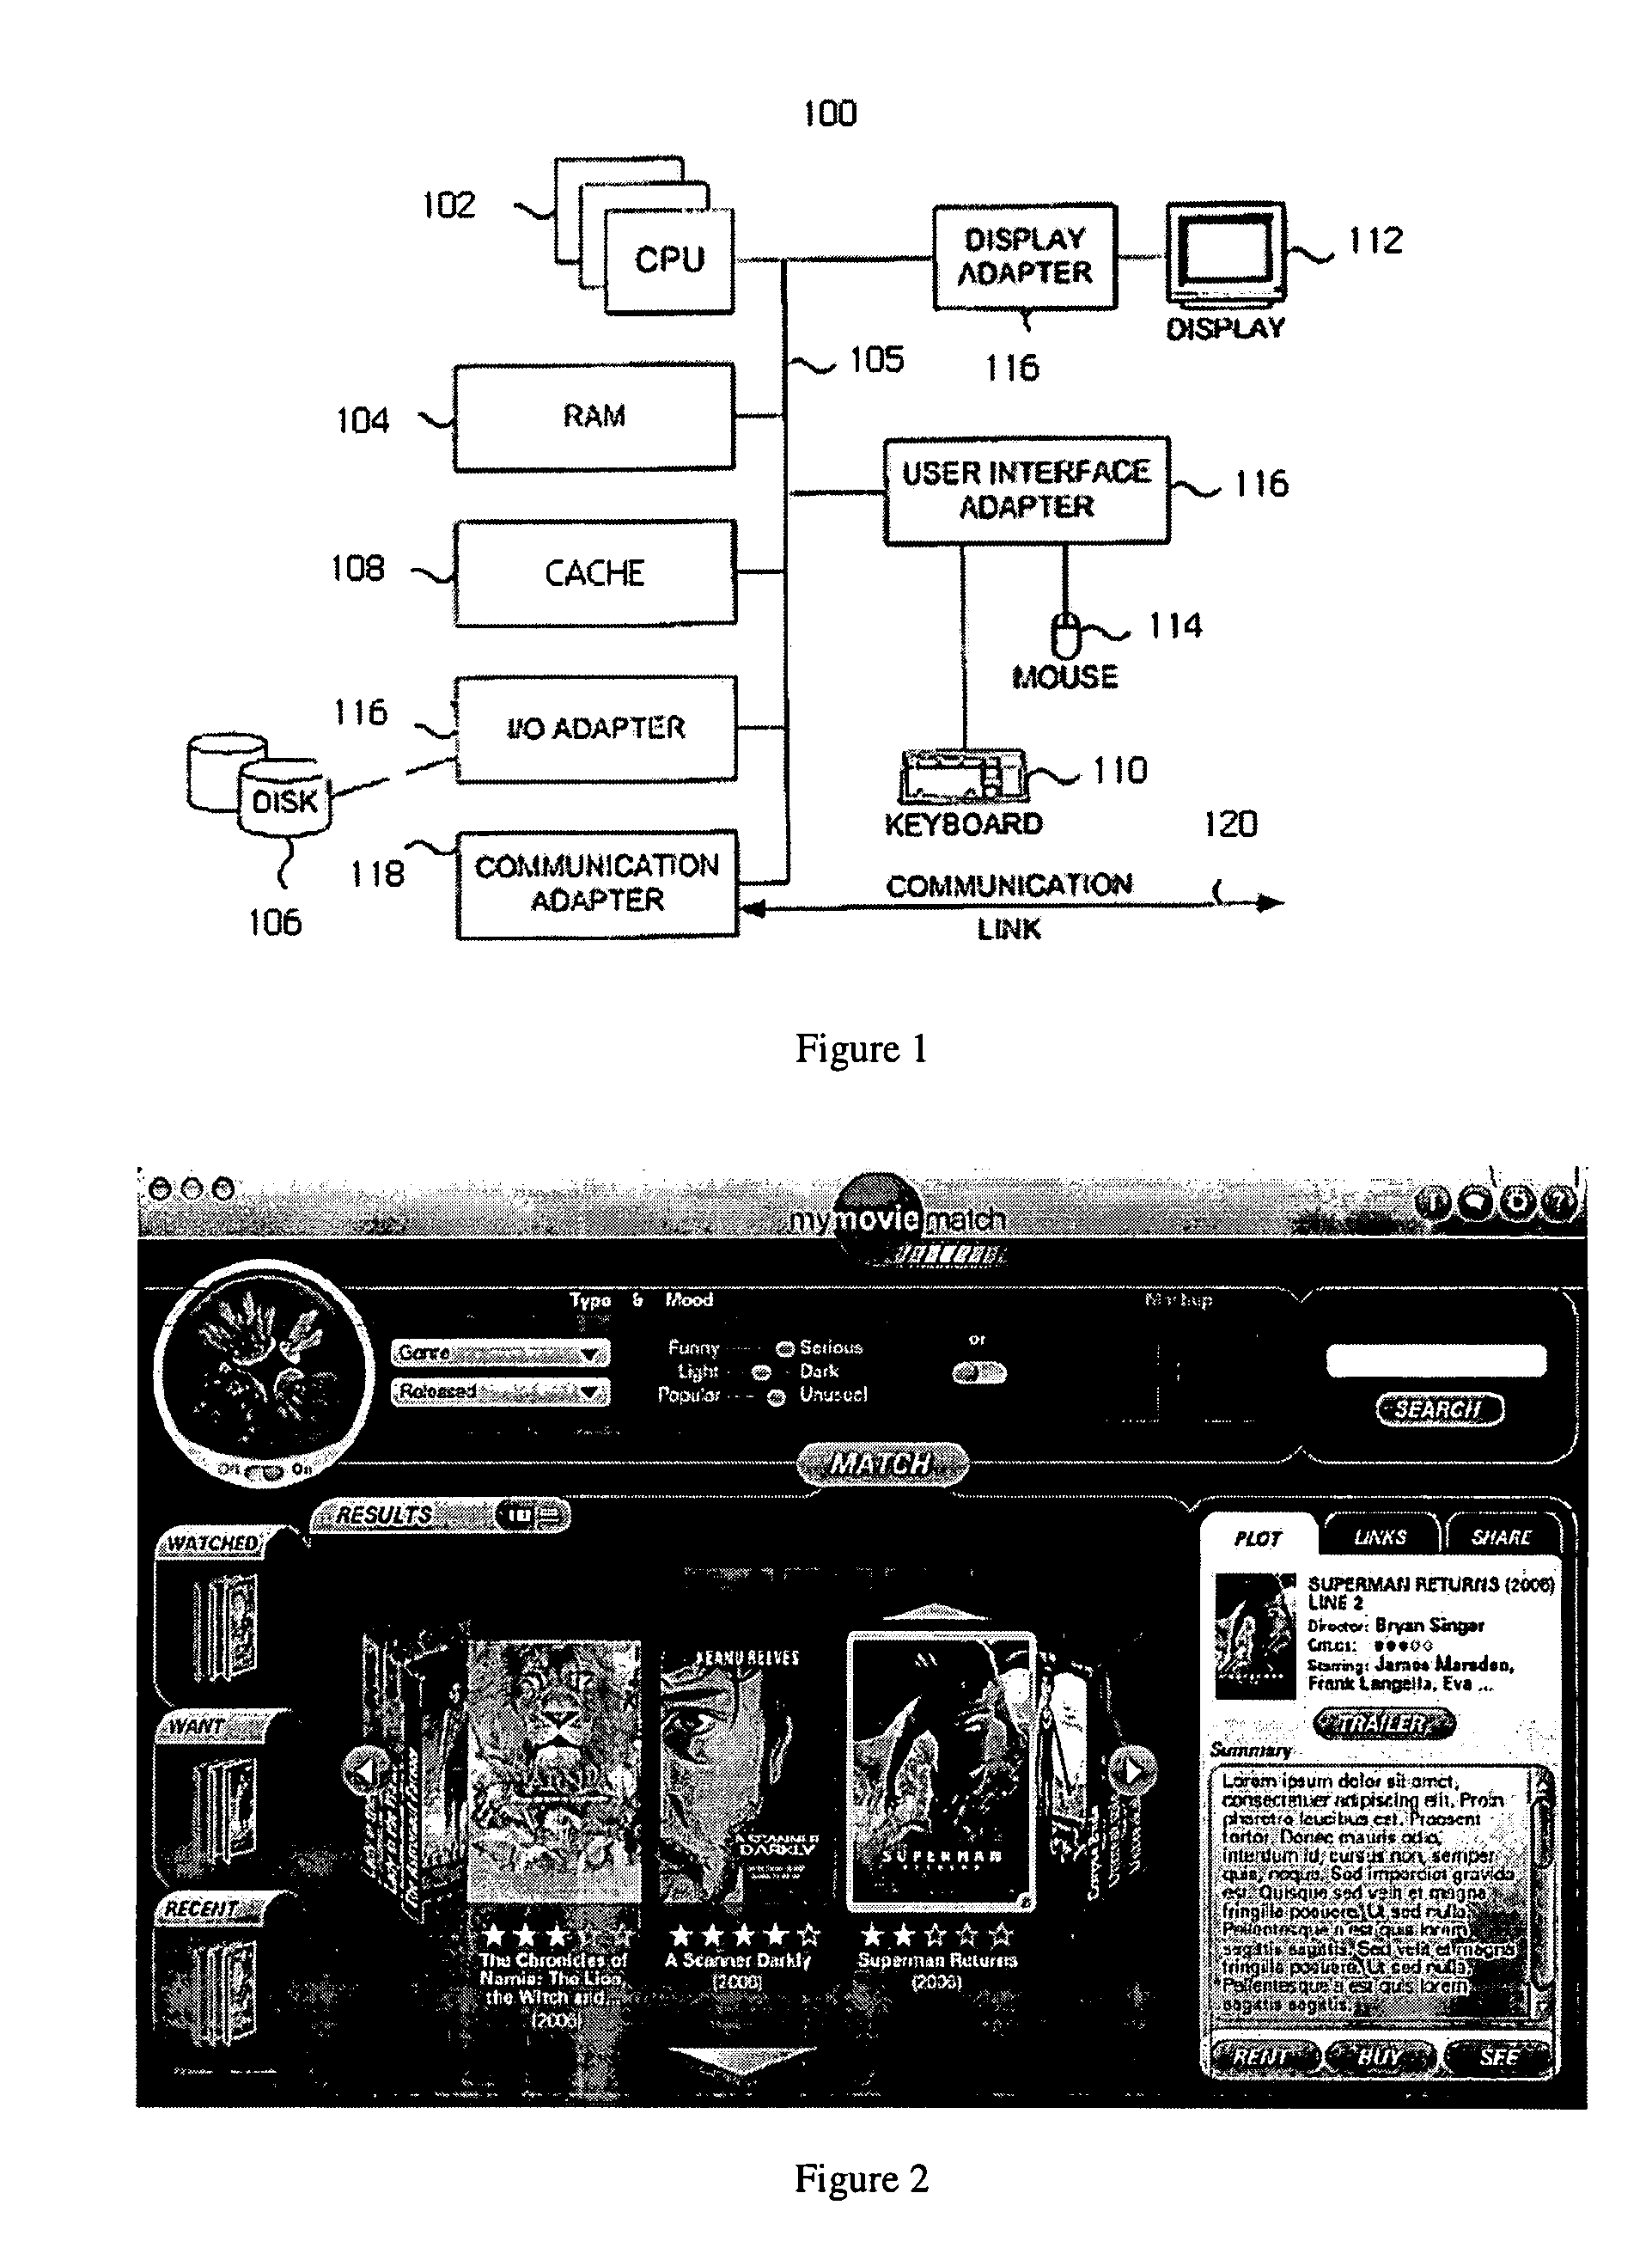 Display method and system for collecting media preference information